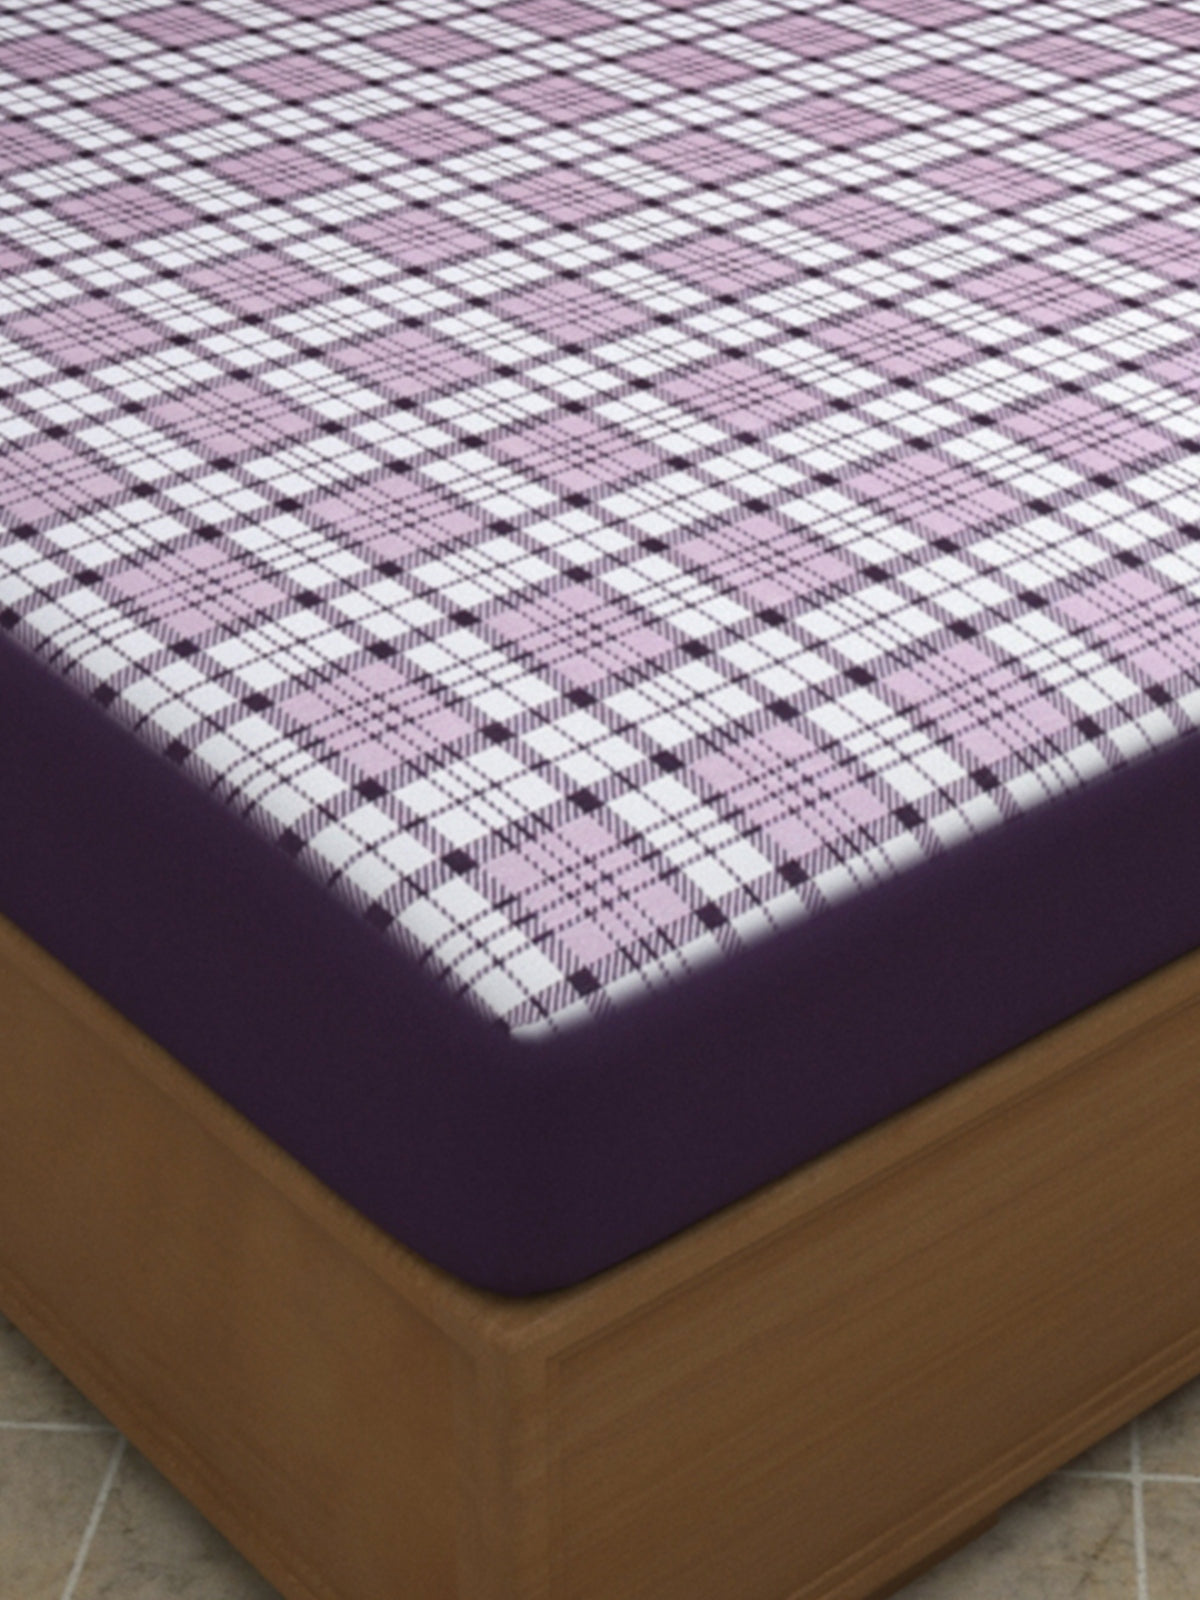 Purple & White Terry Cloth Waterproof Mattress Protector for King Size